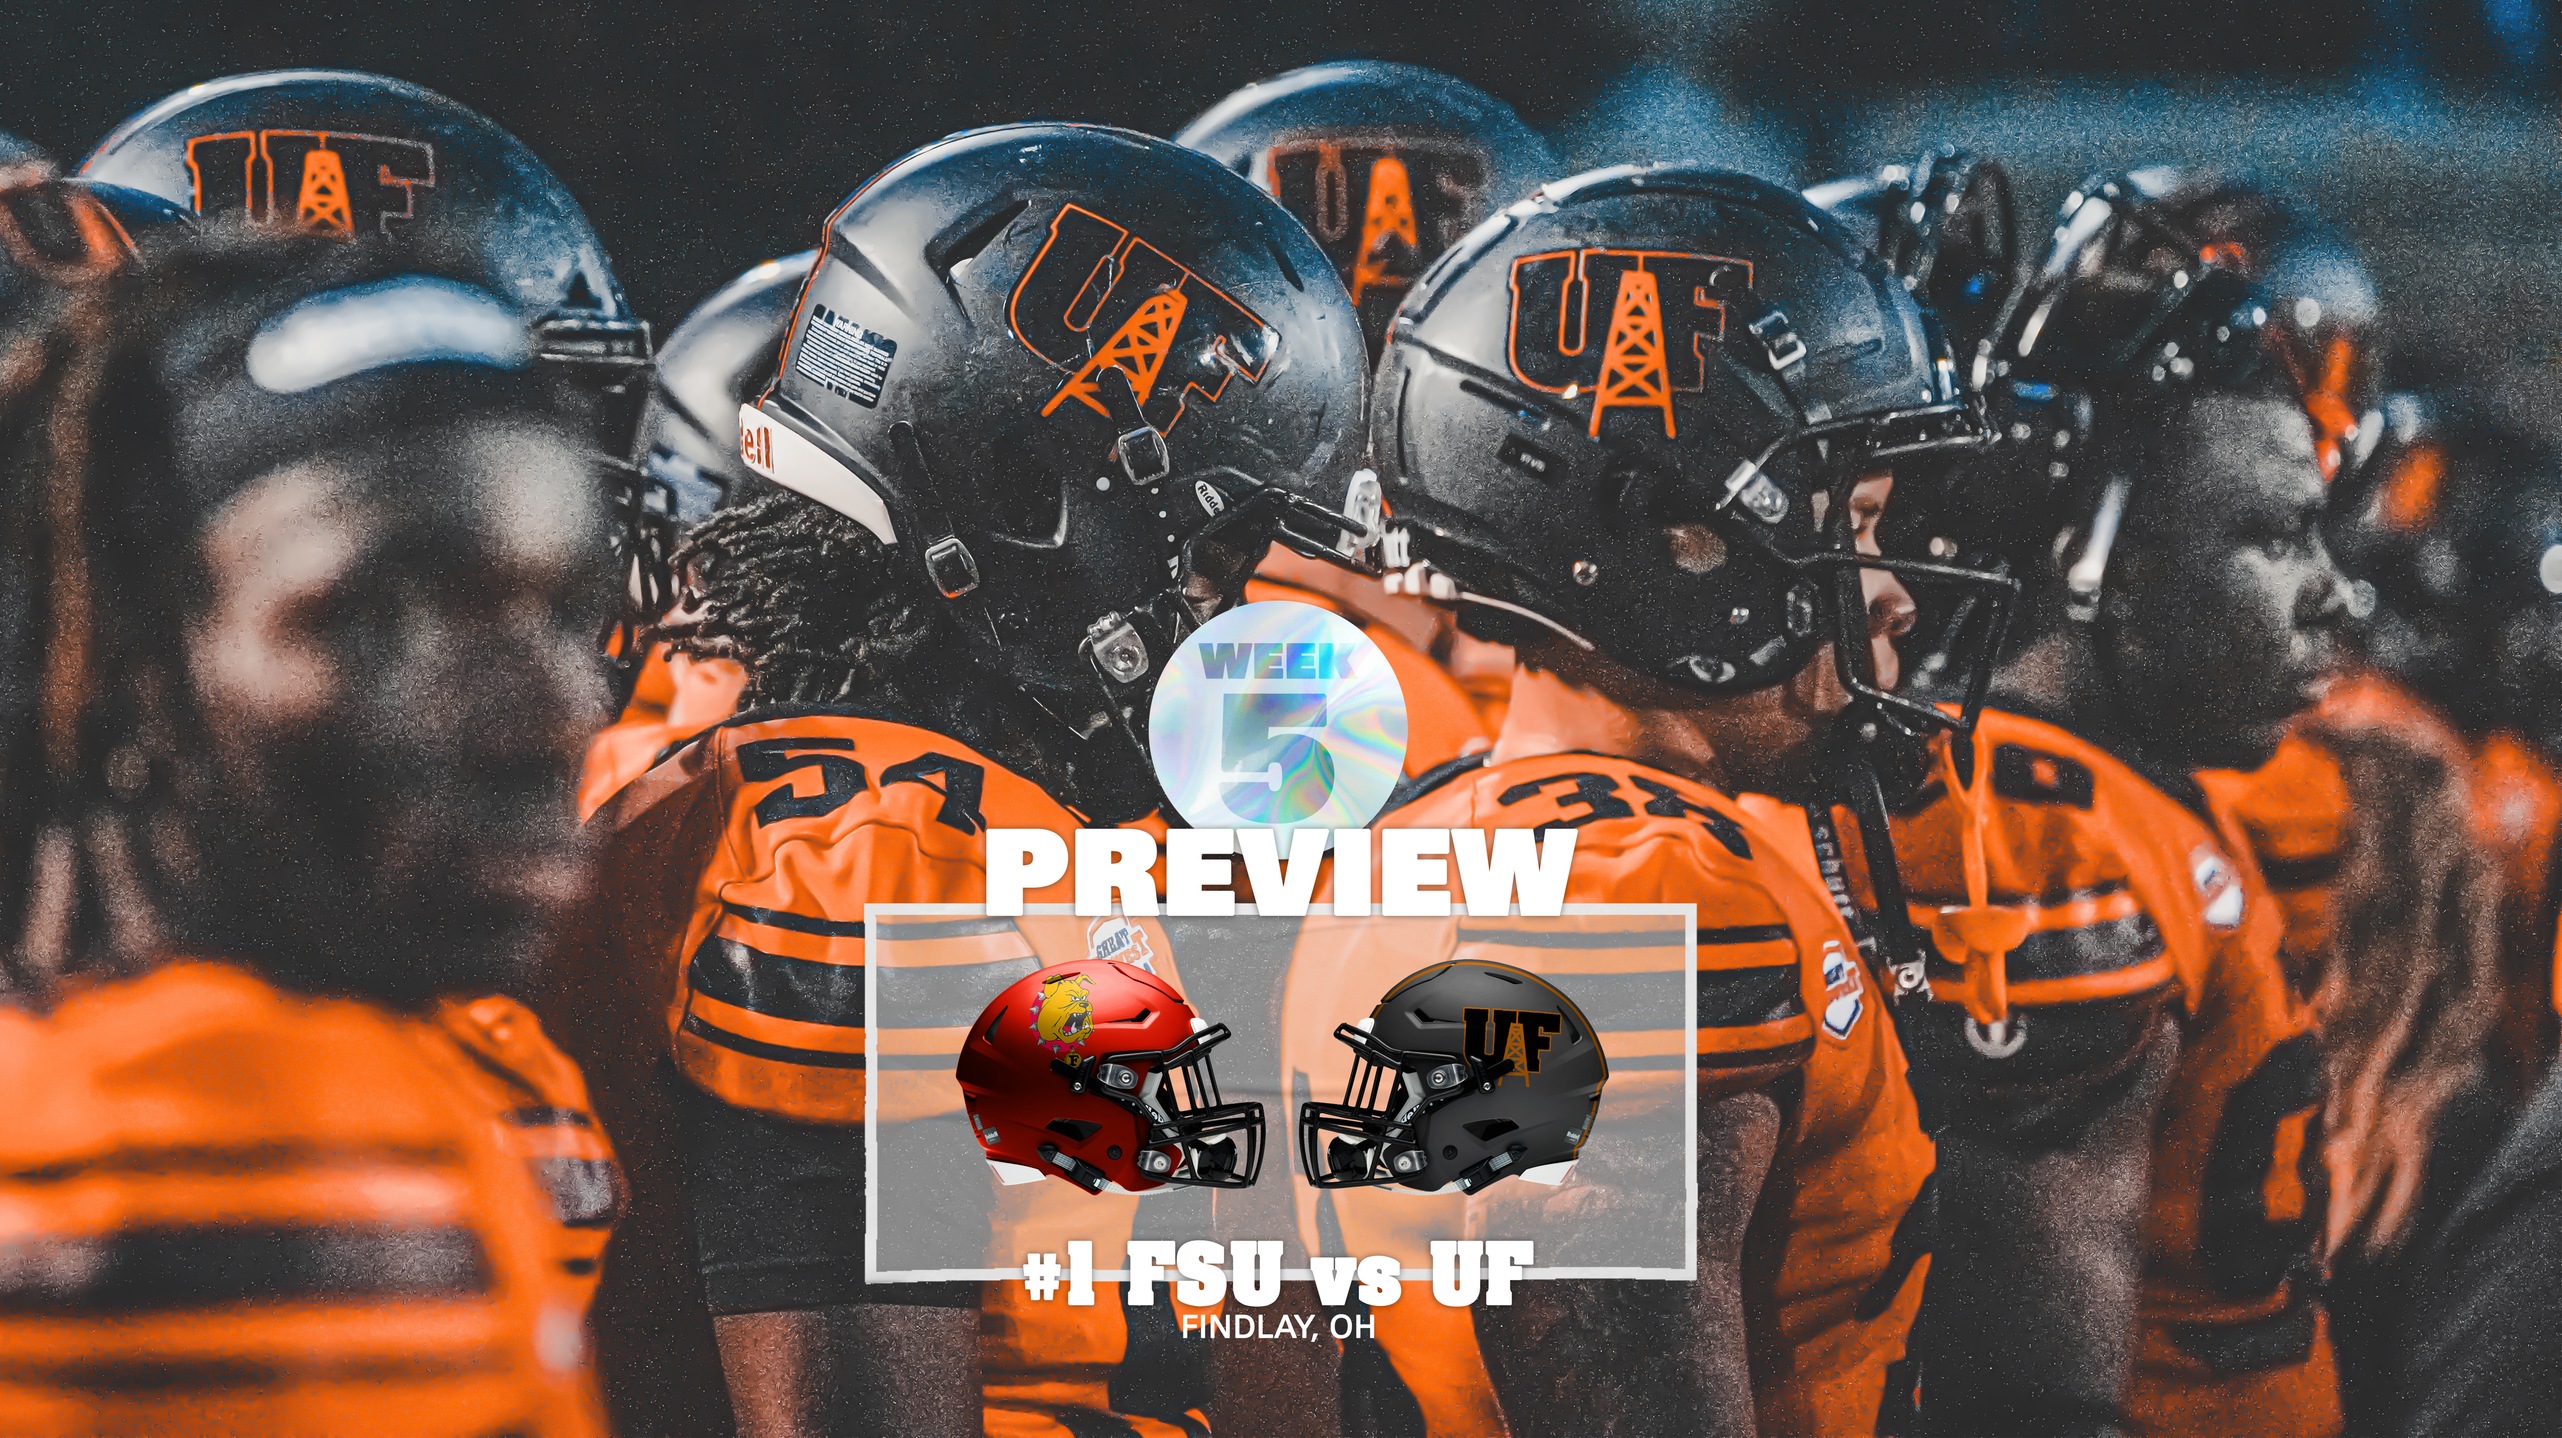 Week 5 Preview | Oilers Welcome #1 Ferris State to Donnell